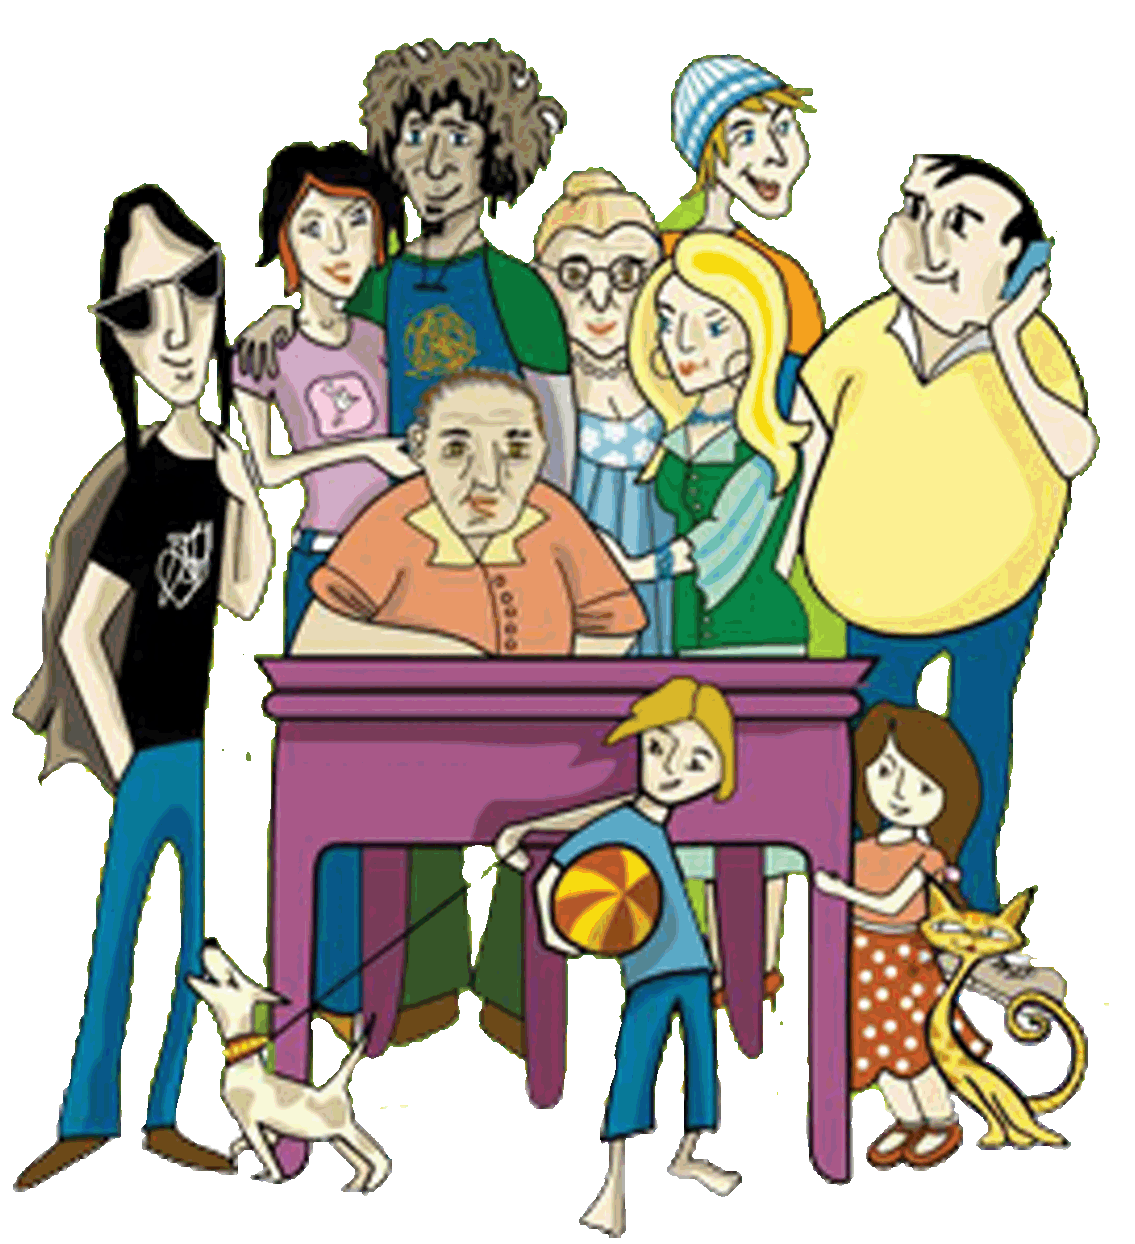 Discussion clipart casual. Collection of free distraining